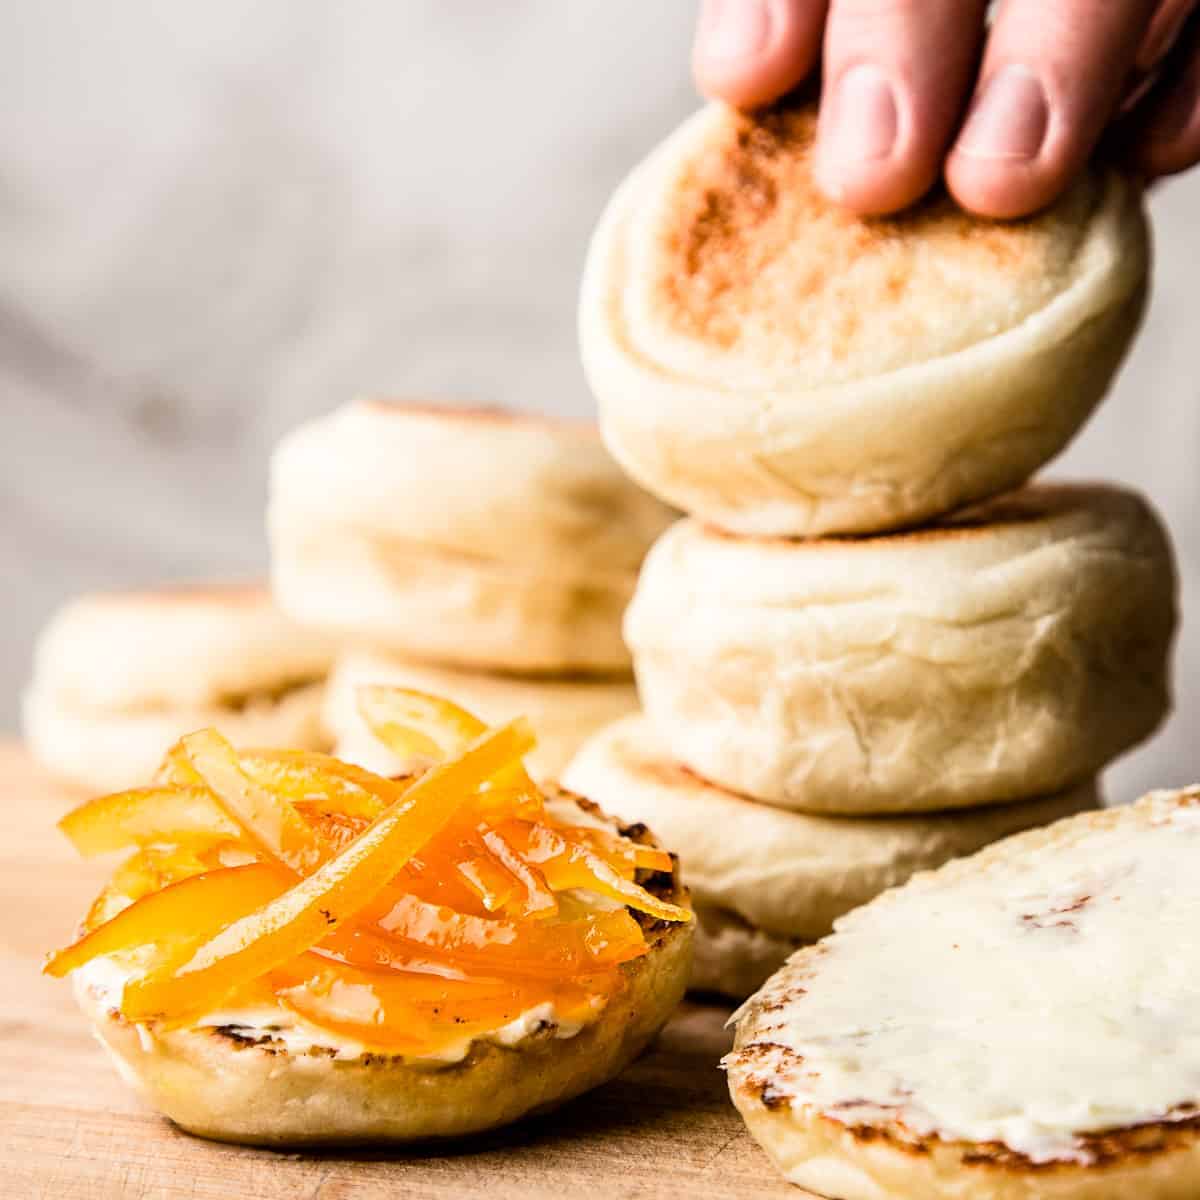 English muffins with orange marmalade on wooden board.